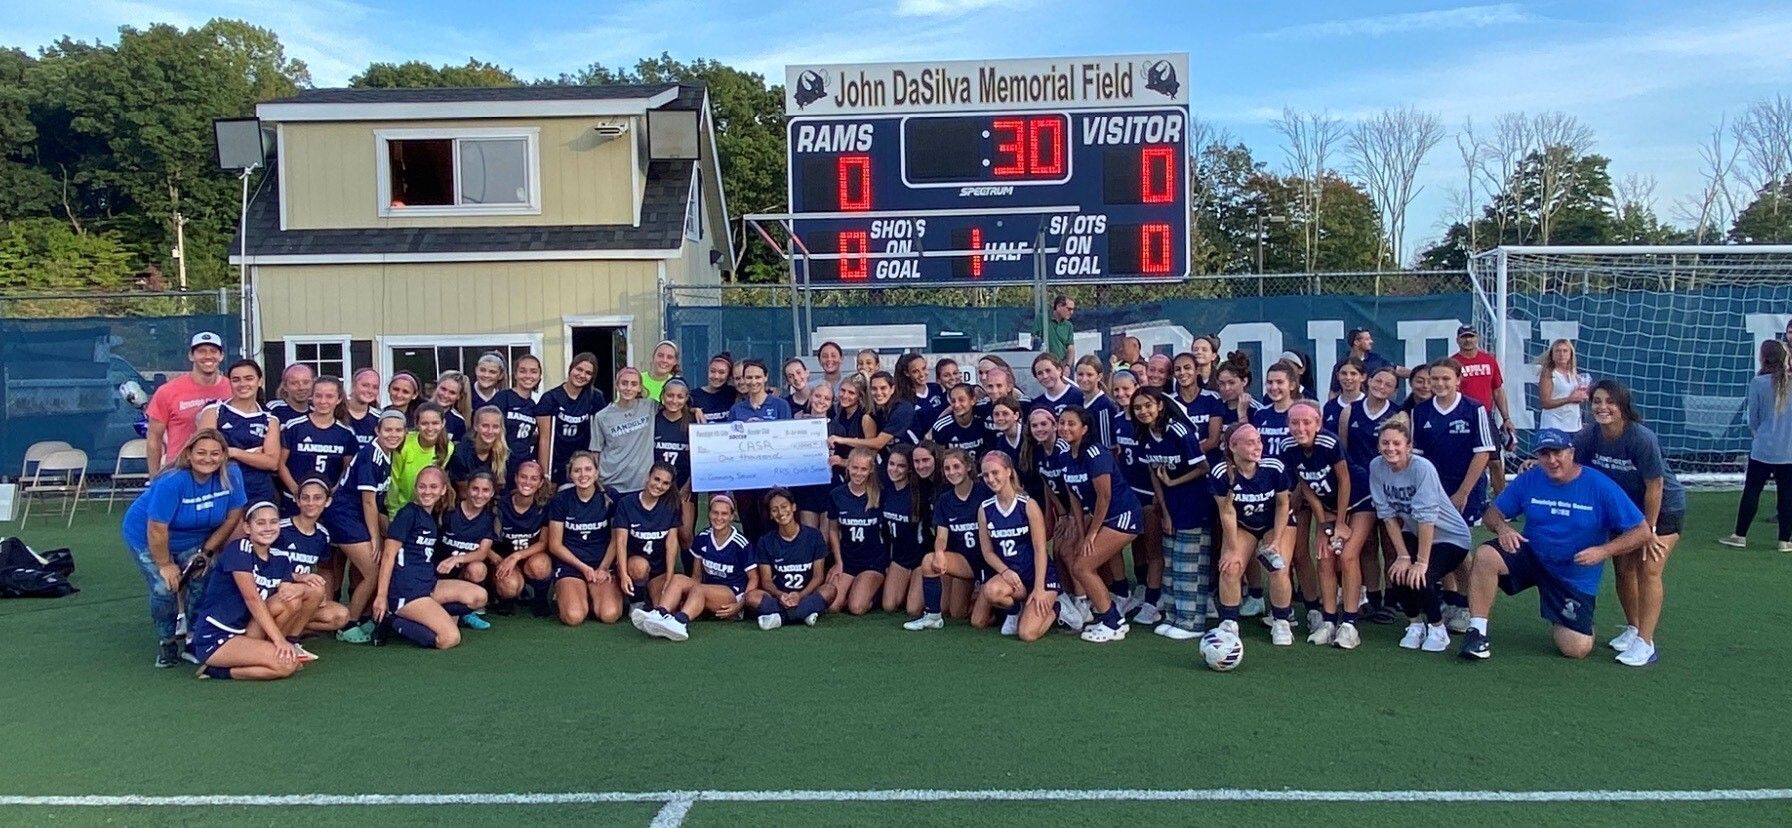 Randolph Girls Soccer Honors Influential Teachers – Treats Them to Victory over Chatham